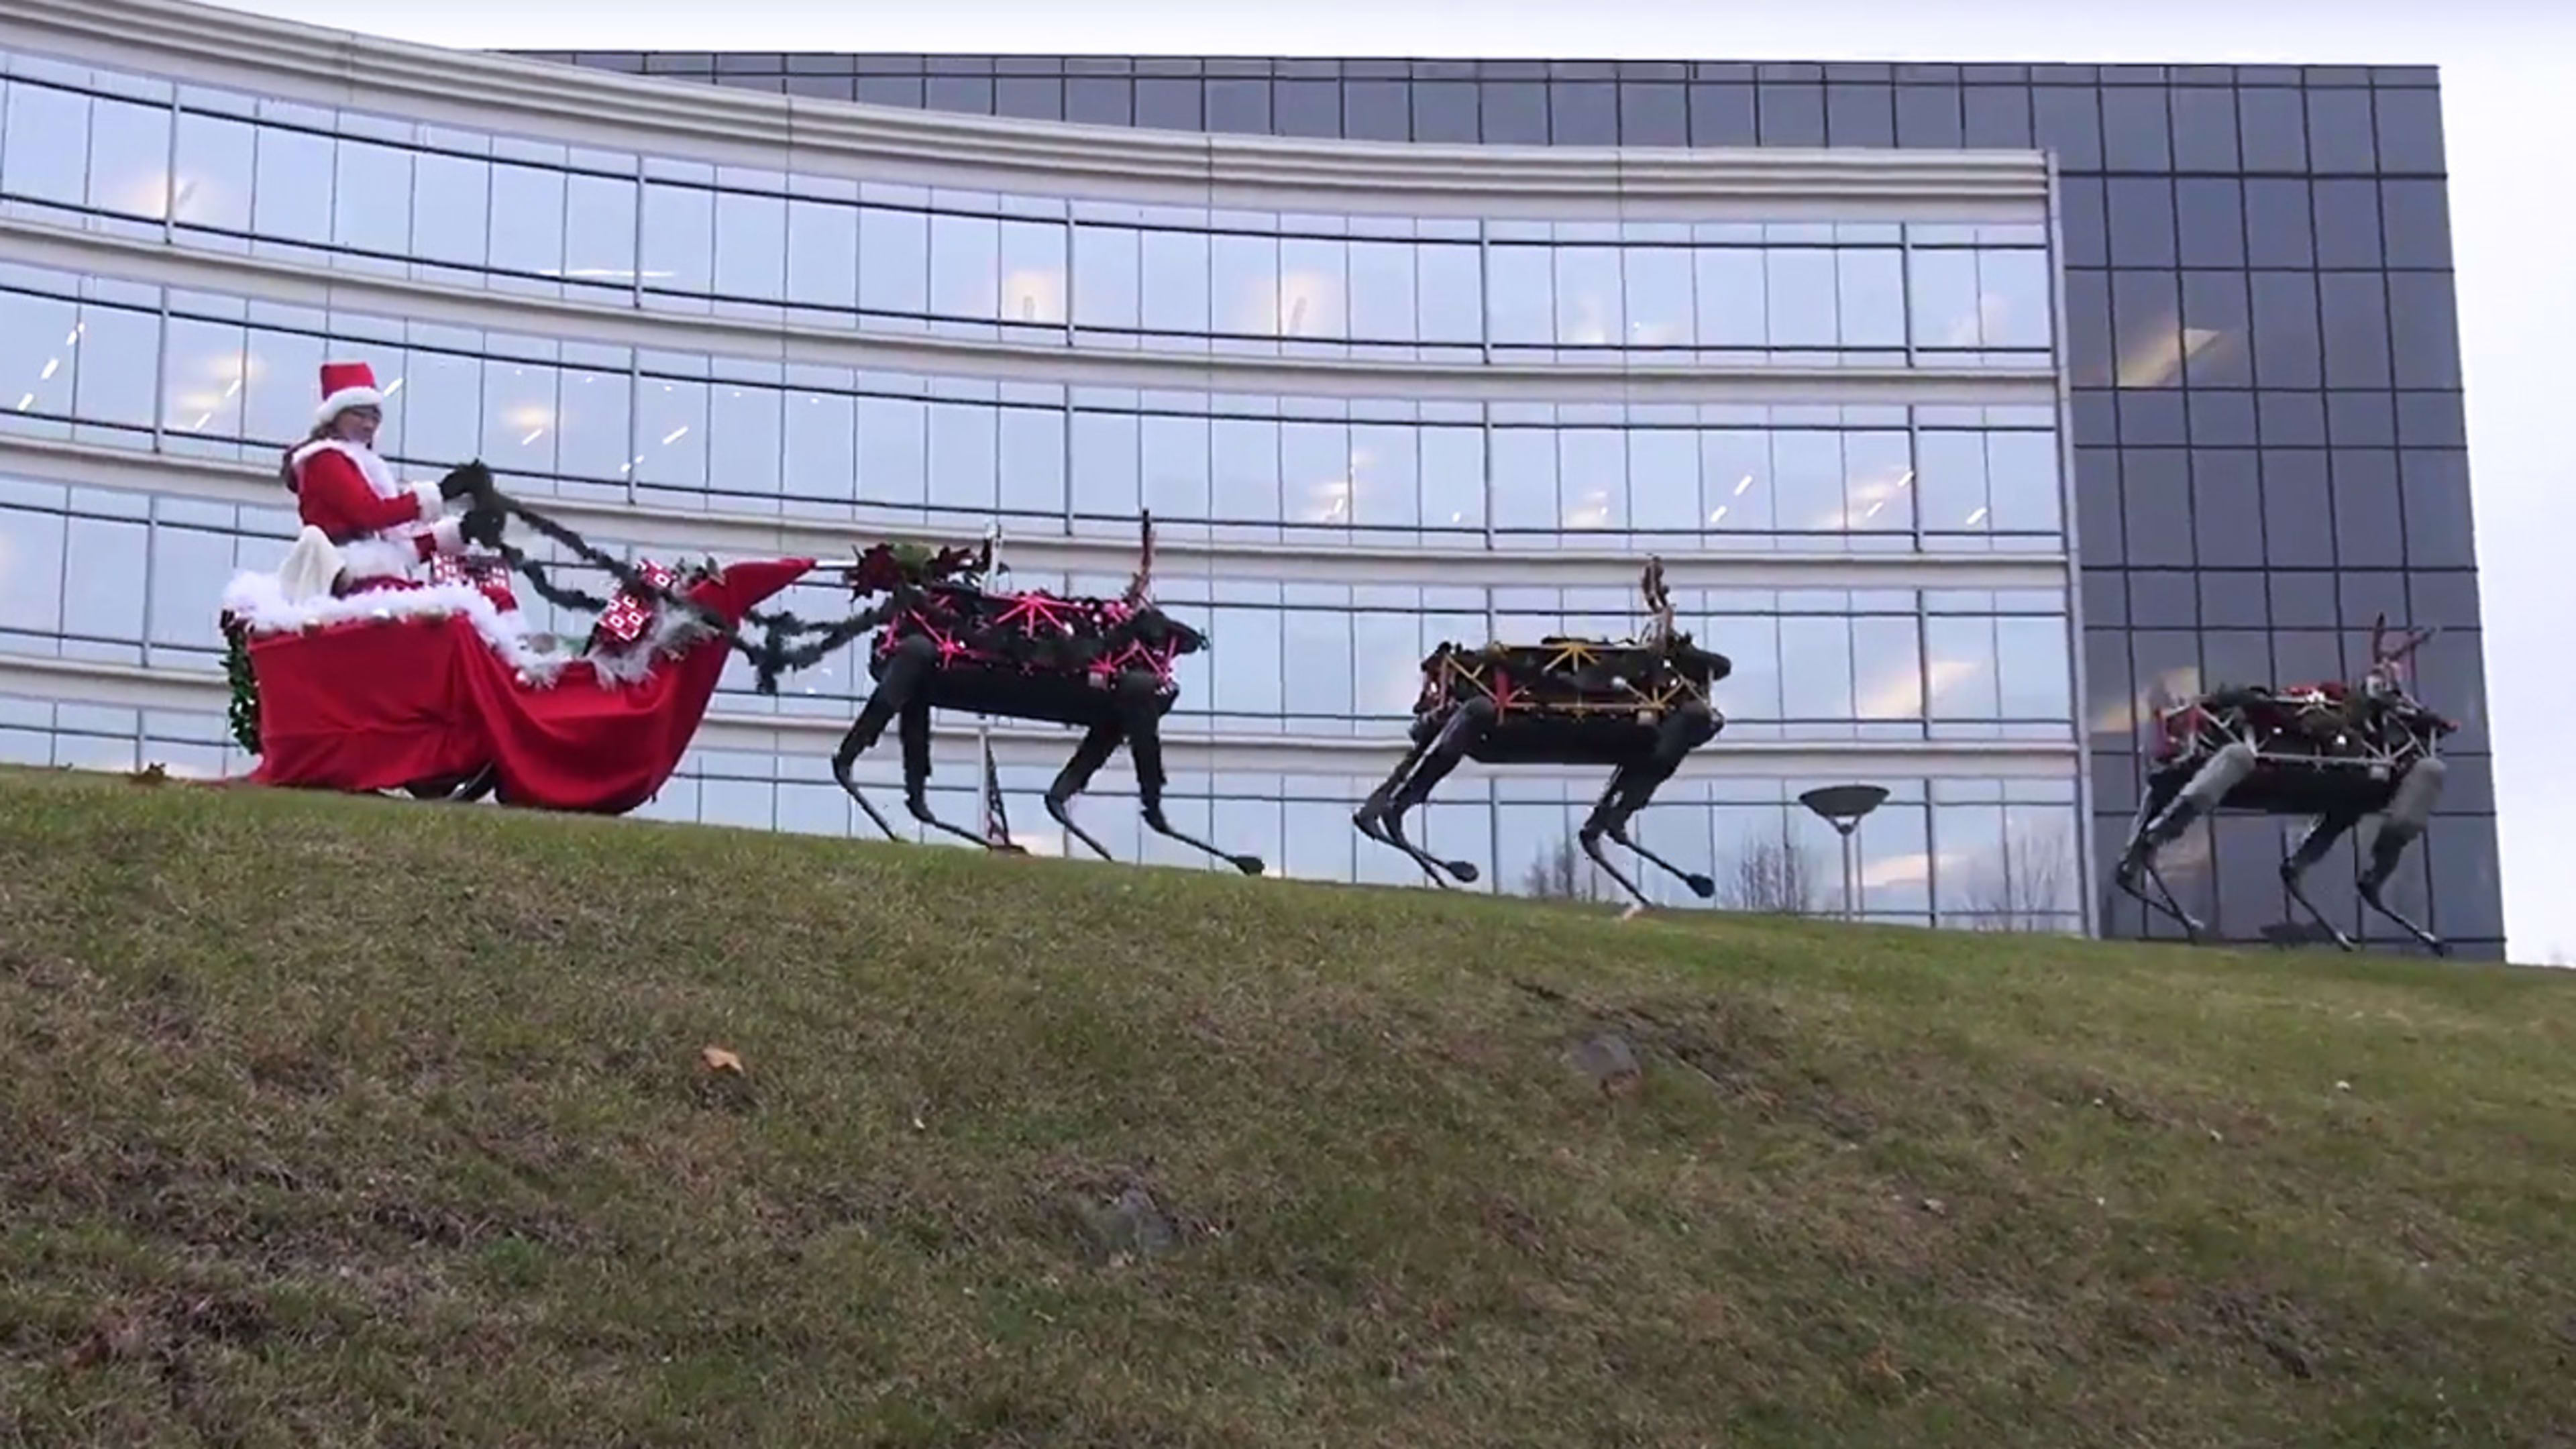 Are Boston Dynamics’ Robot Reindeer The Ghosts Of Christmas Future?